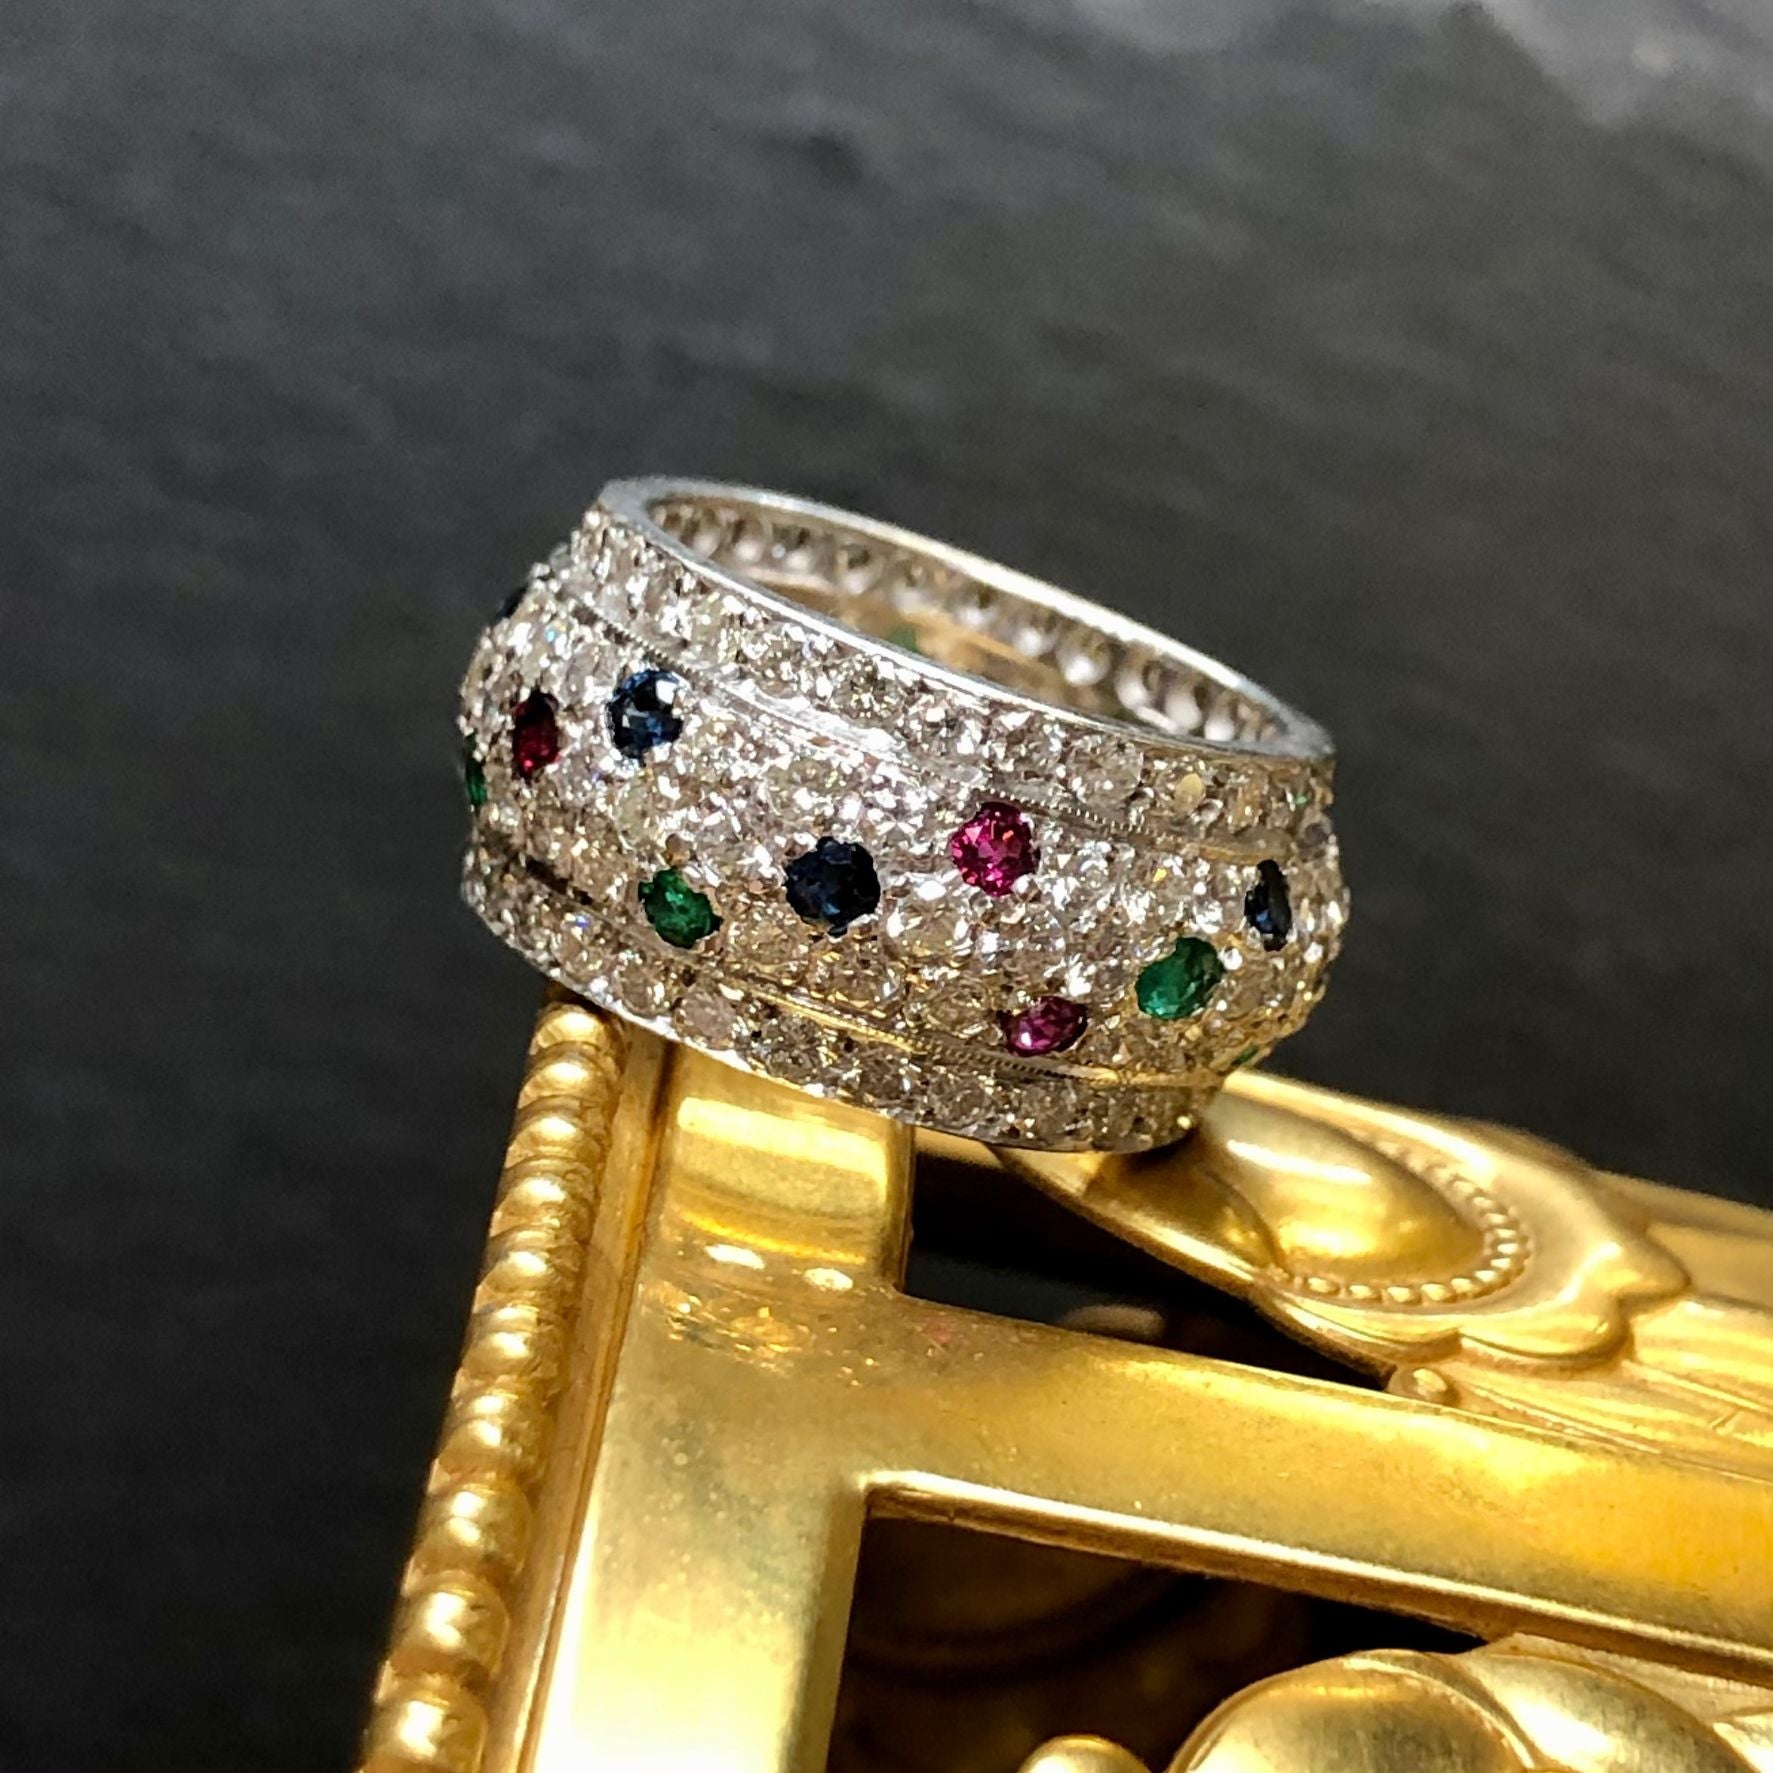 A beautiful slightly domed wide pave diamond band done in 18K white gold set with approximately 3.90ctw in G-J color Vs2-Si1 clarity round diamonds as well as natural rubies, sapphires and emeralds.

Dimensions
.40” wide. Size 6.5.

Condition
All